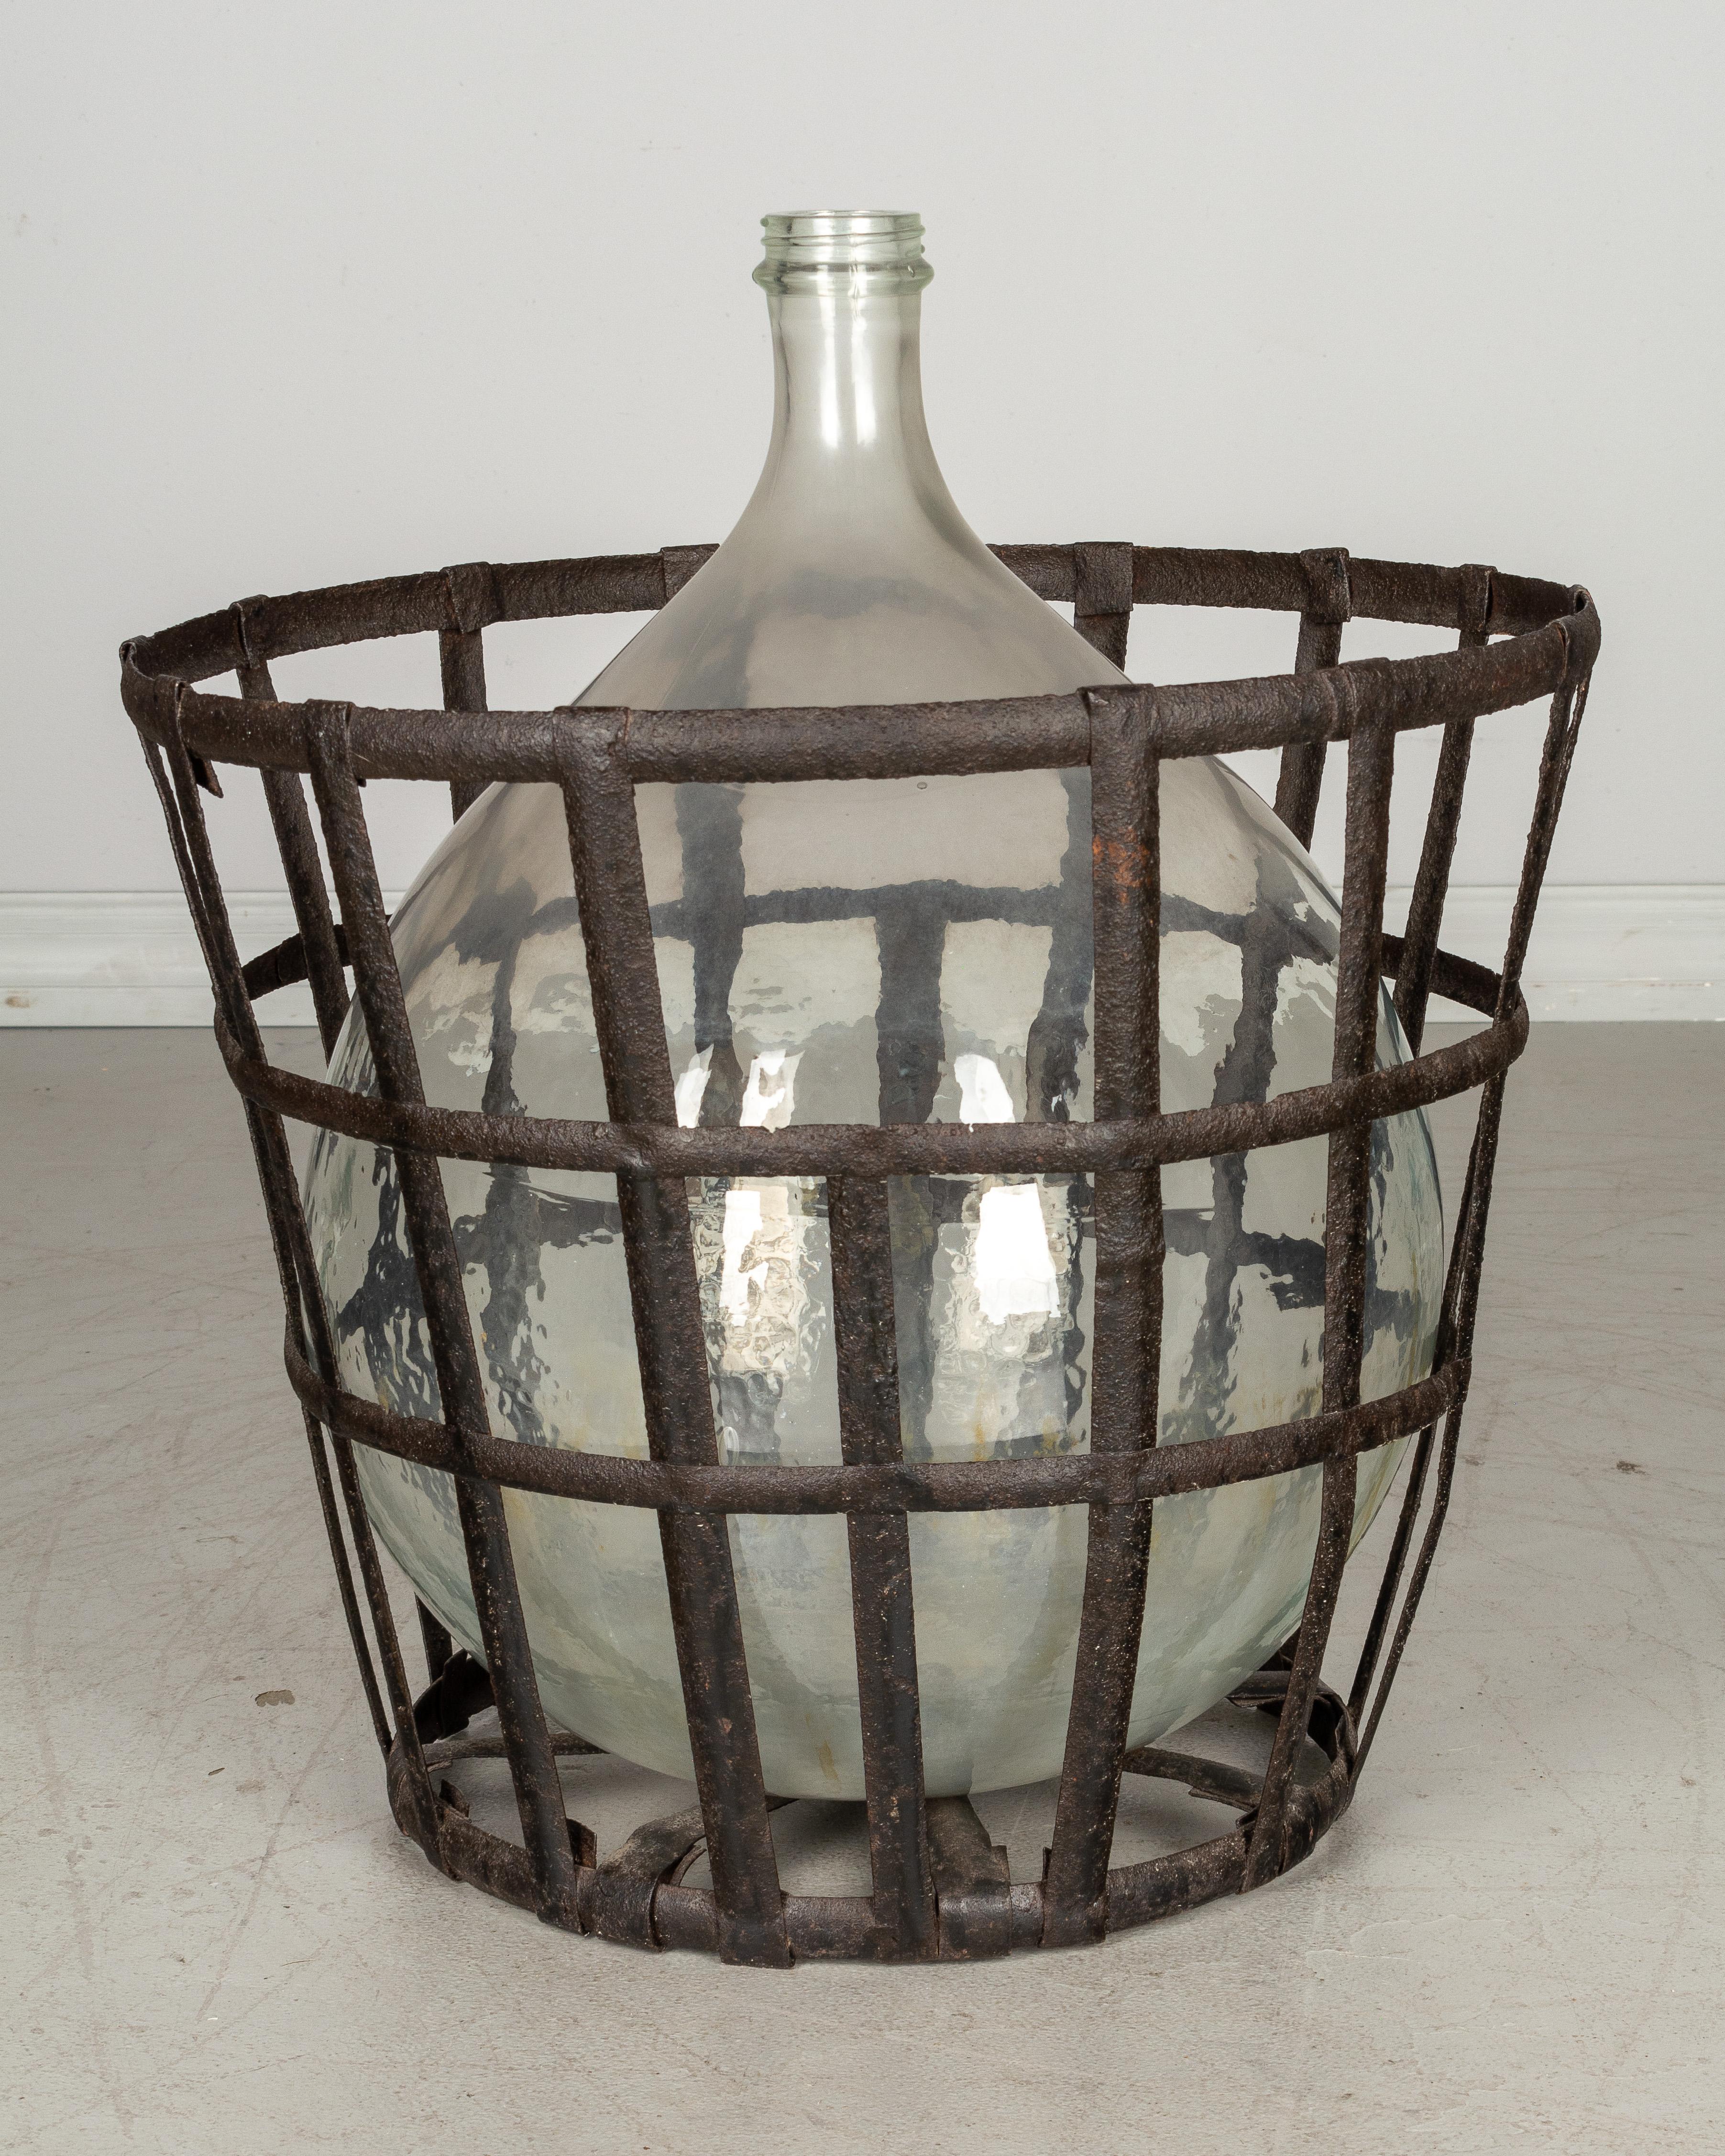 Hand-Crafted French Glass Demijohn Bottle in Metal Basket